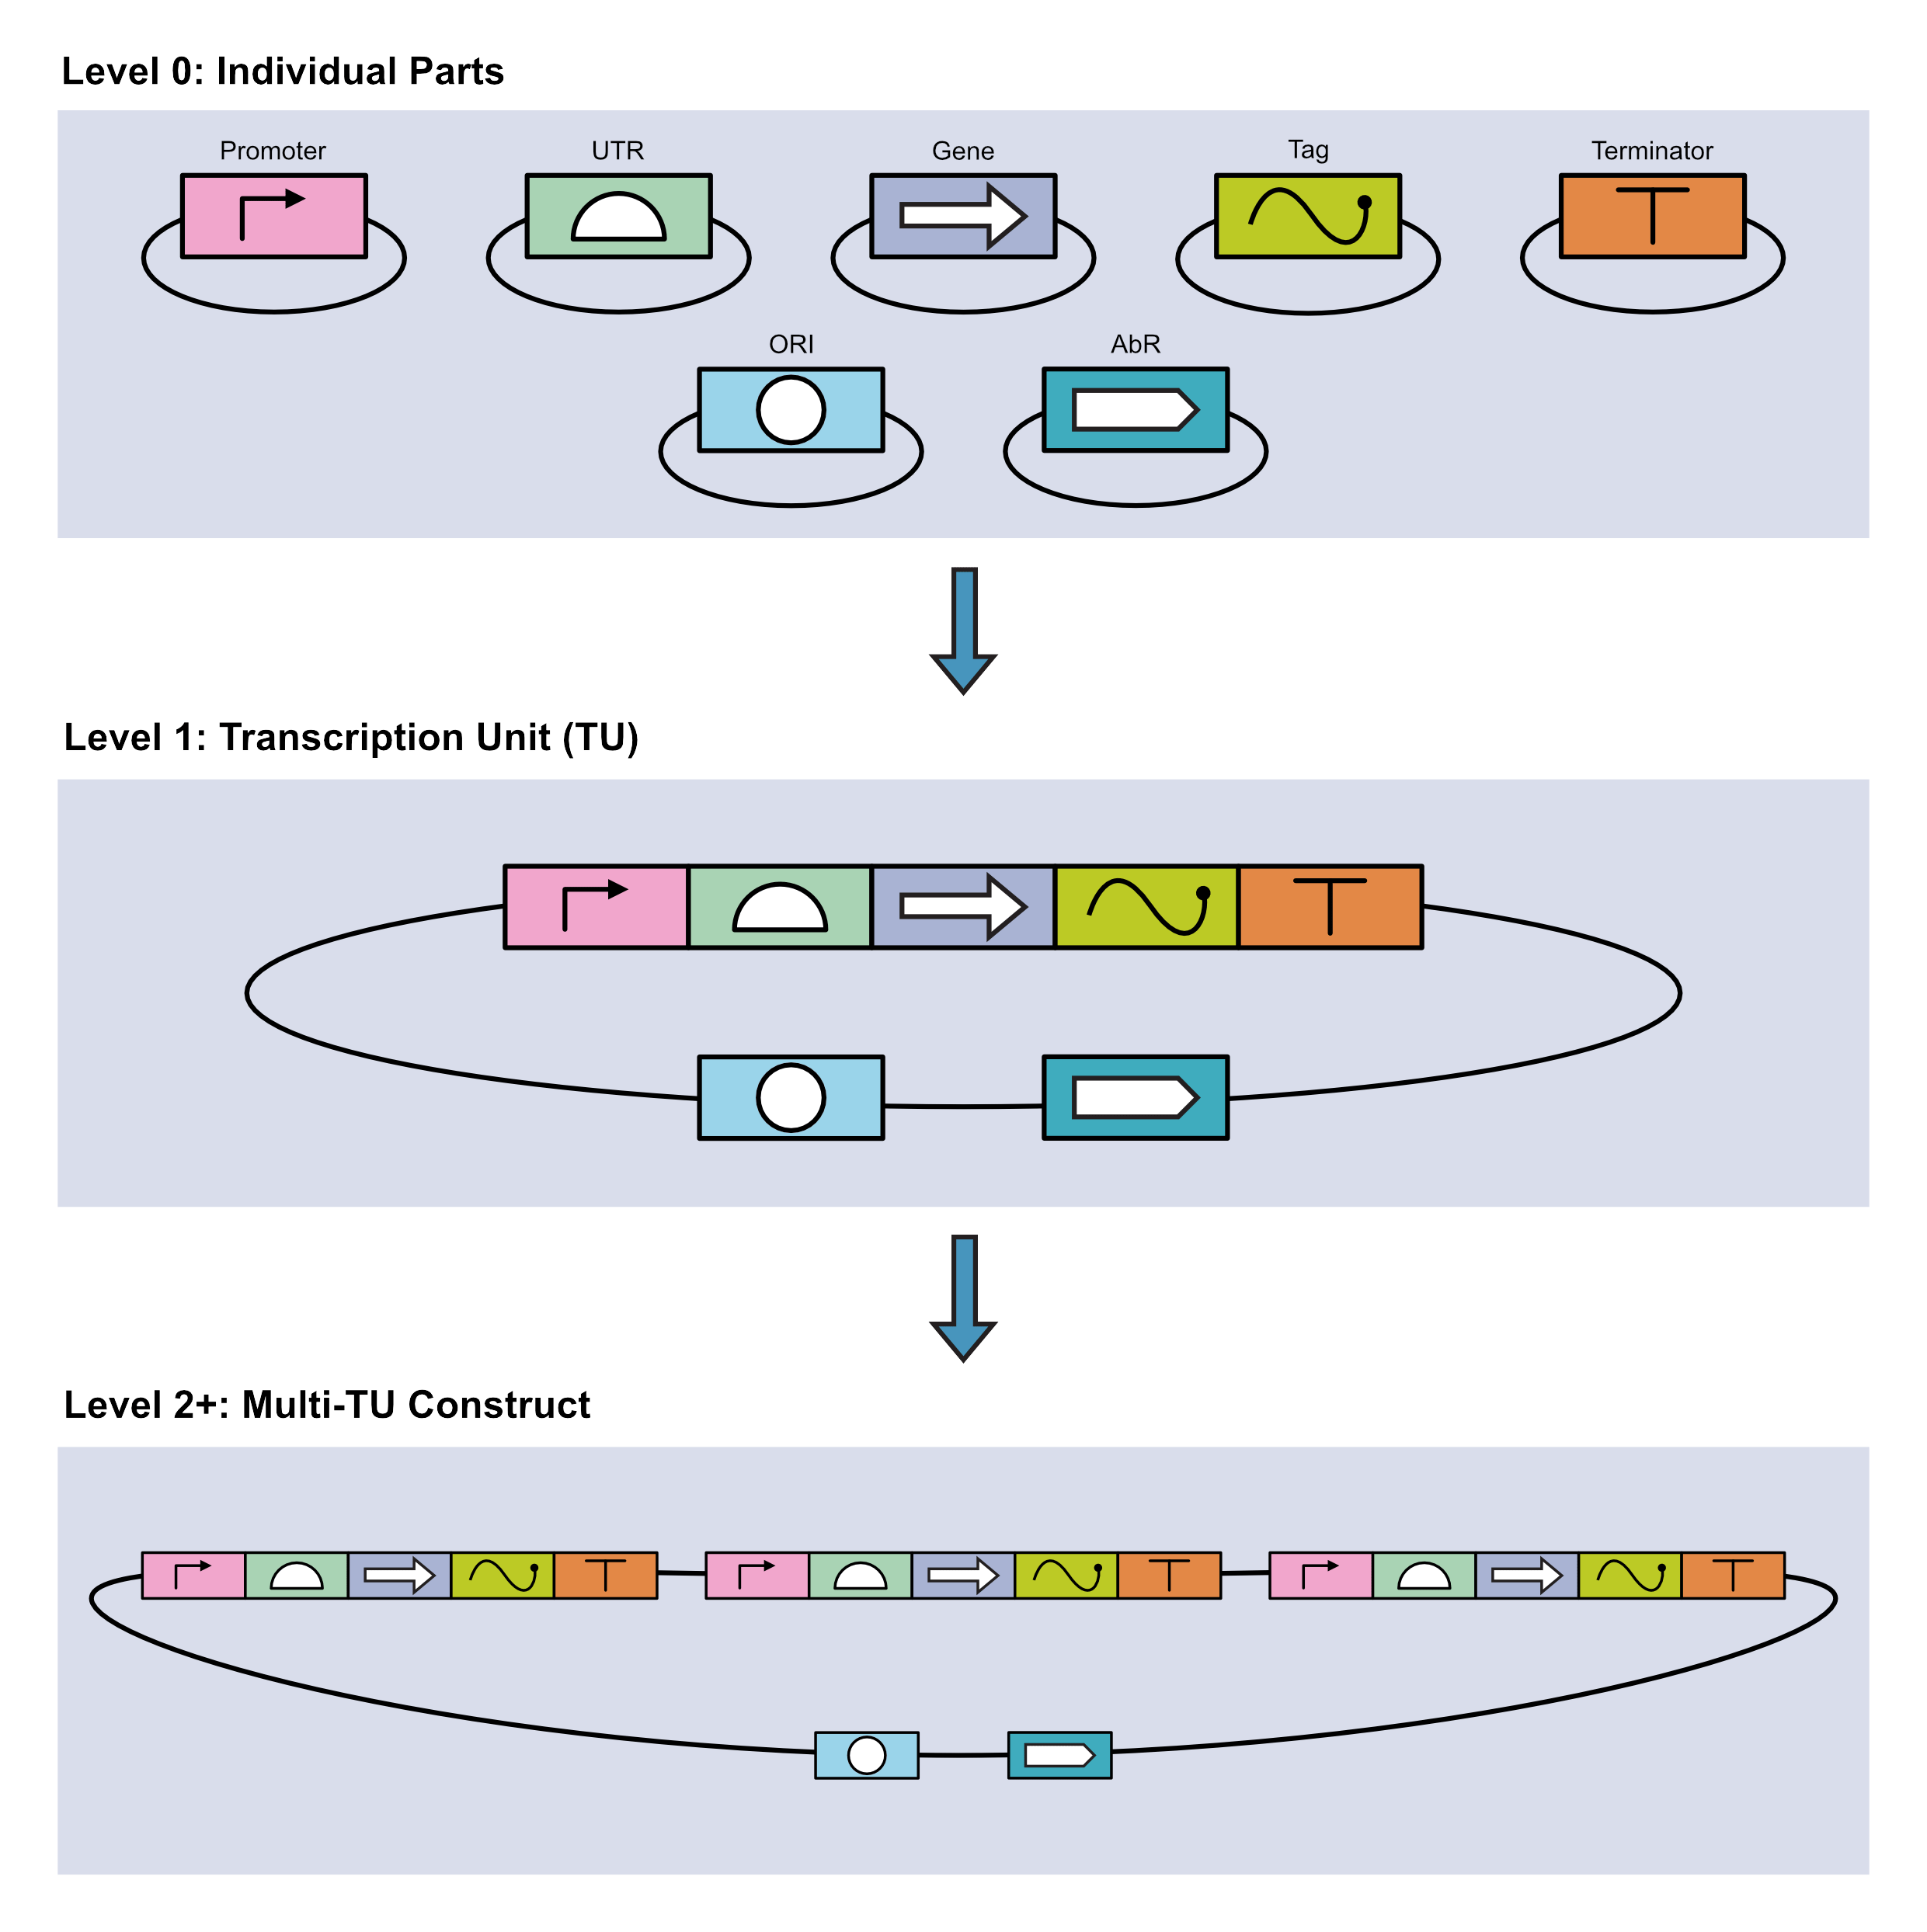 Schematic showing the three assembly levels of MoClo. Level 1 has 7 individual parts on a plasmid; Level 1 has seven parts all together on on plasmid; Level 2+ has three sets of five parts each on a plasmid, with two additional parts on the plasmid but separated from the sets.